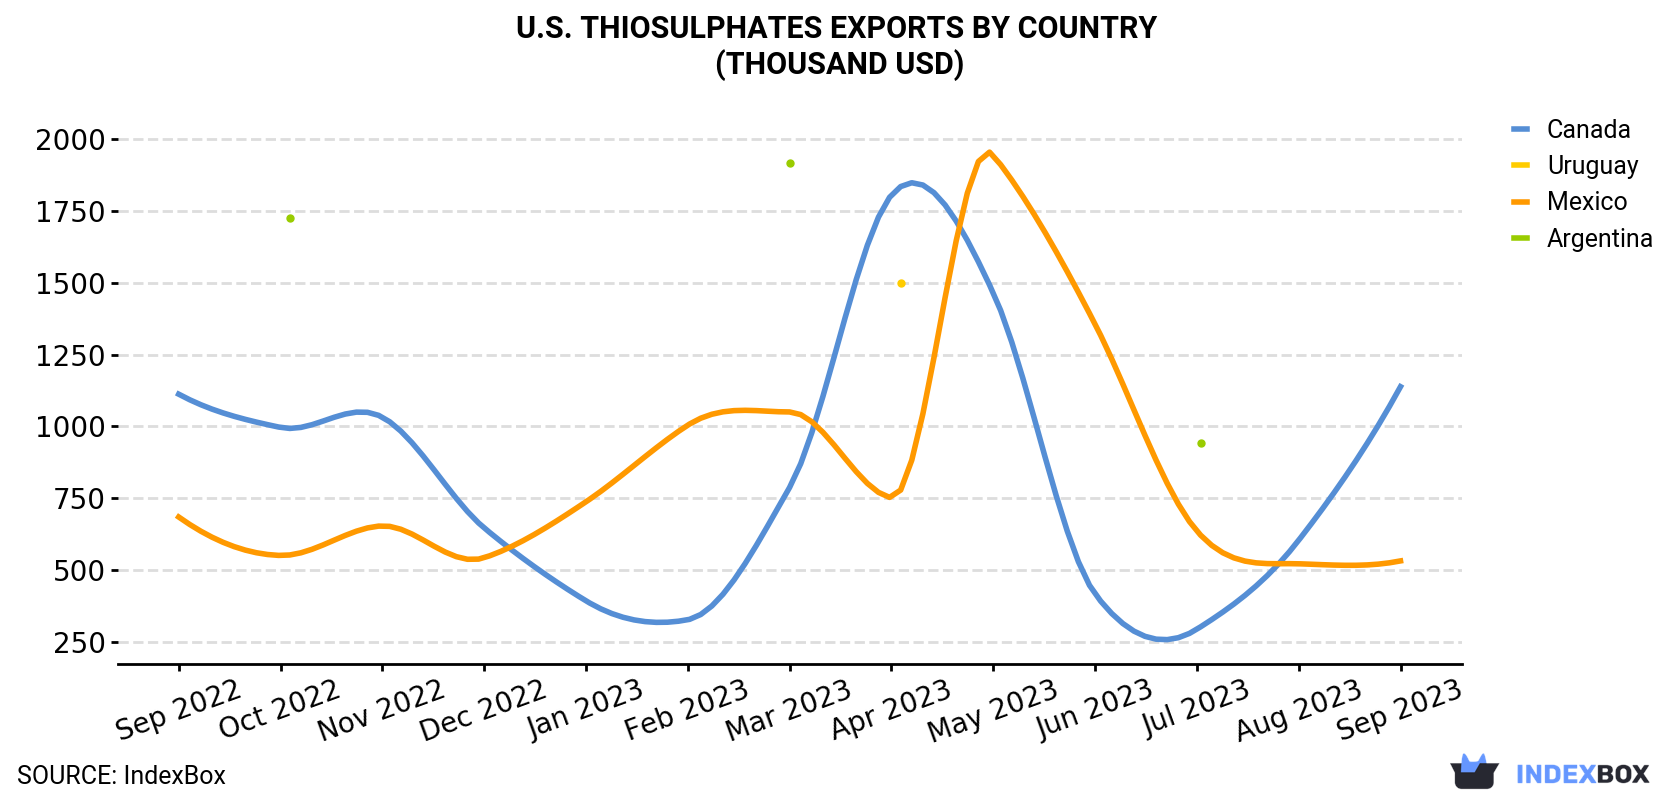 U.S. Thiosulphates Exports By Country (Thousand USD)